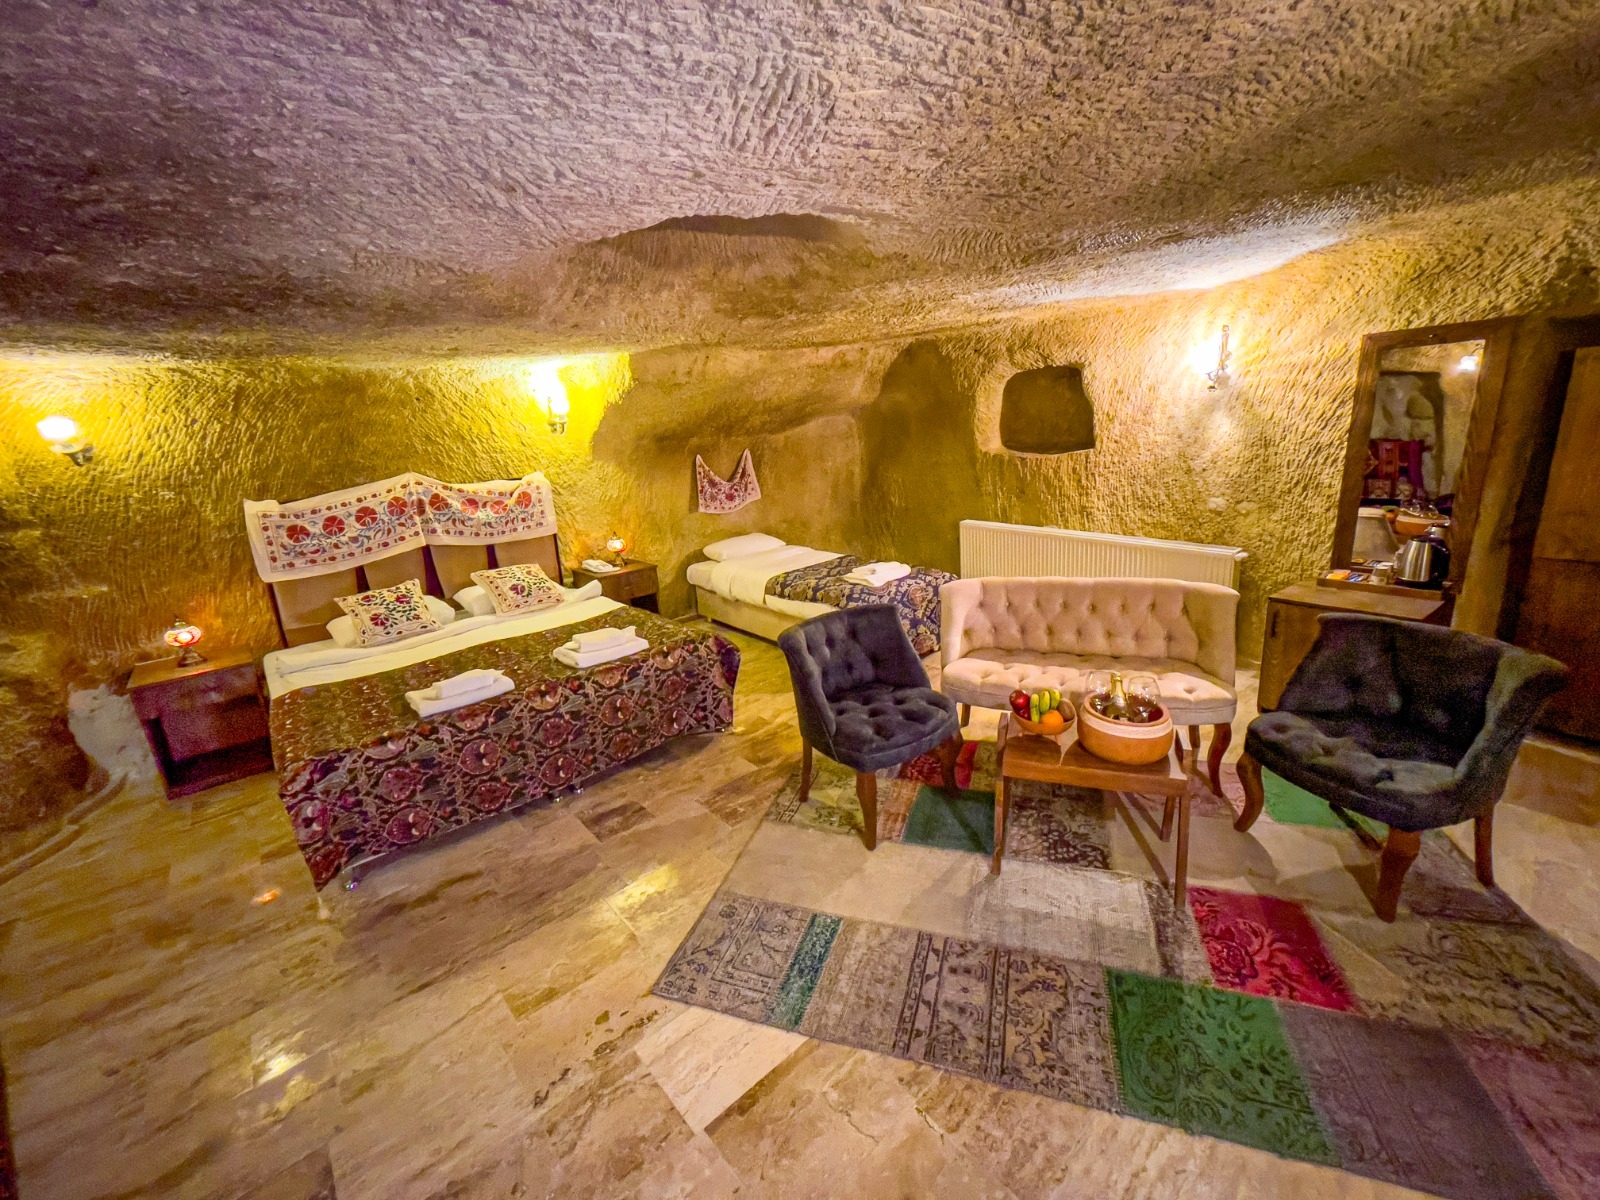 Family Cave Room